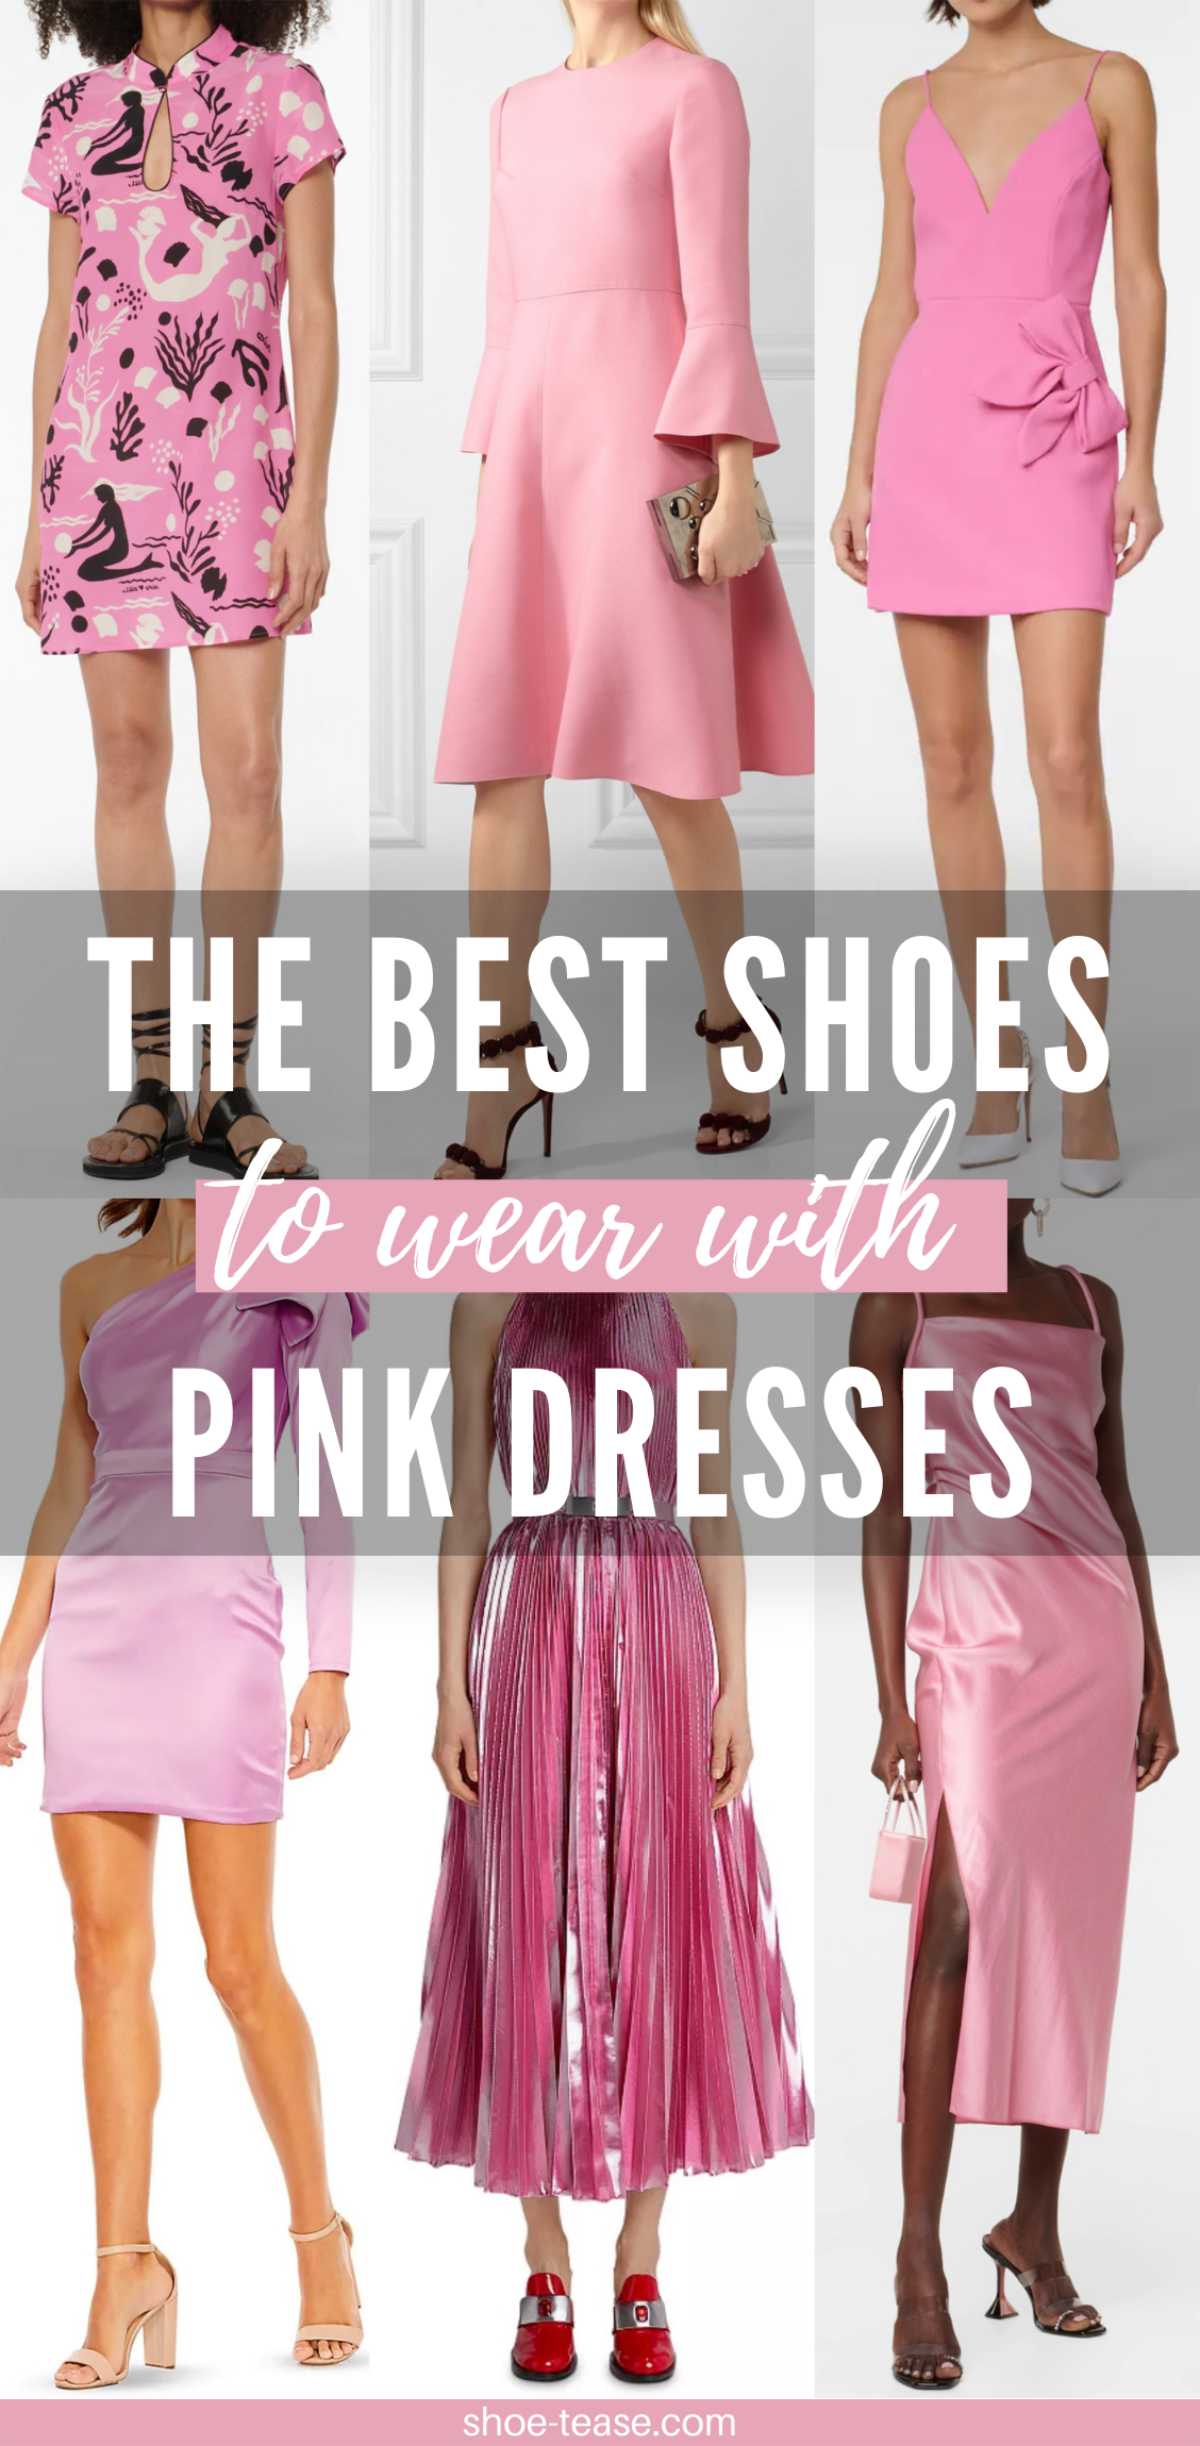 Wht Color Shoes to Wear with Pink Dresses Pin